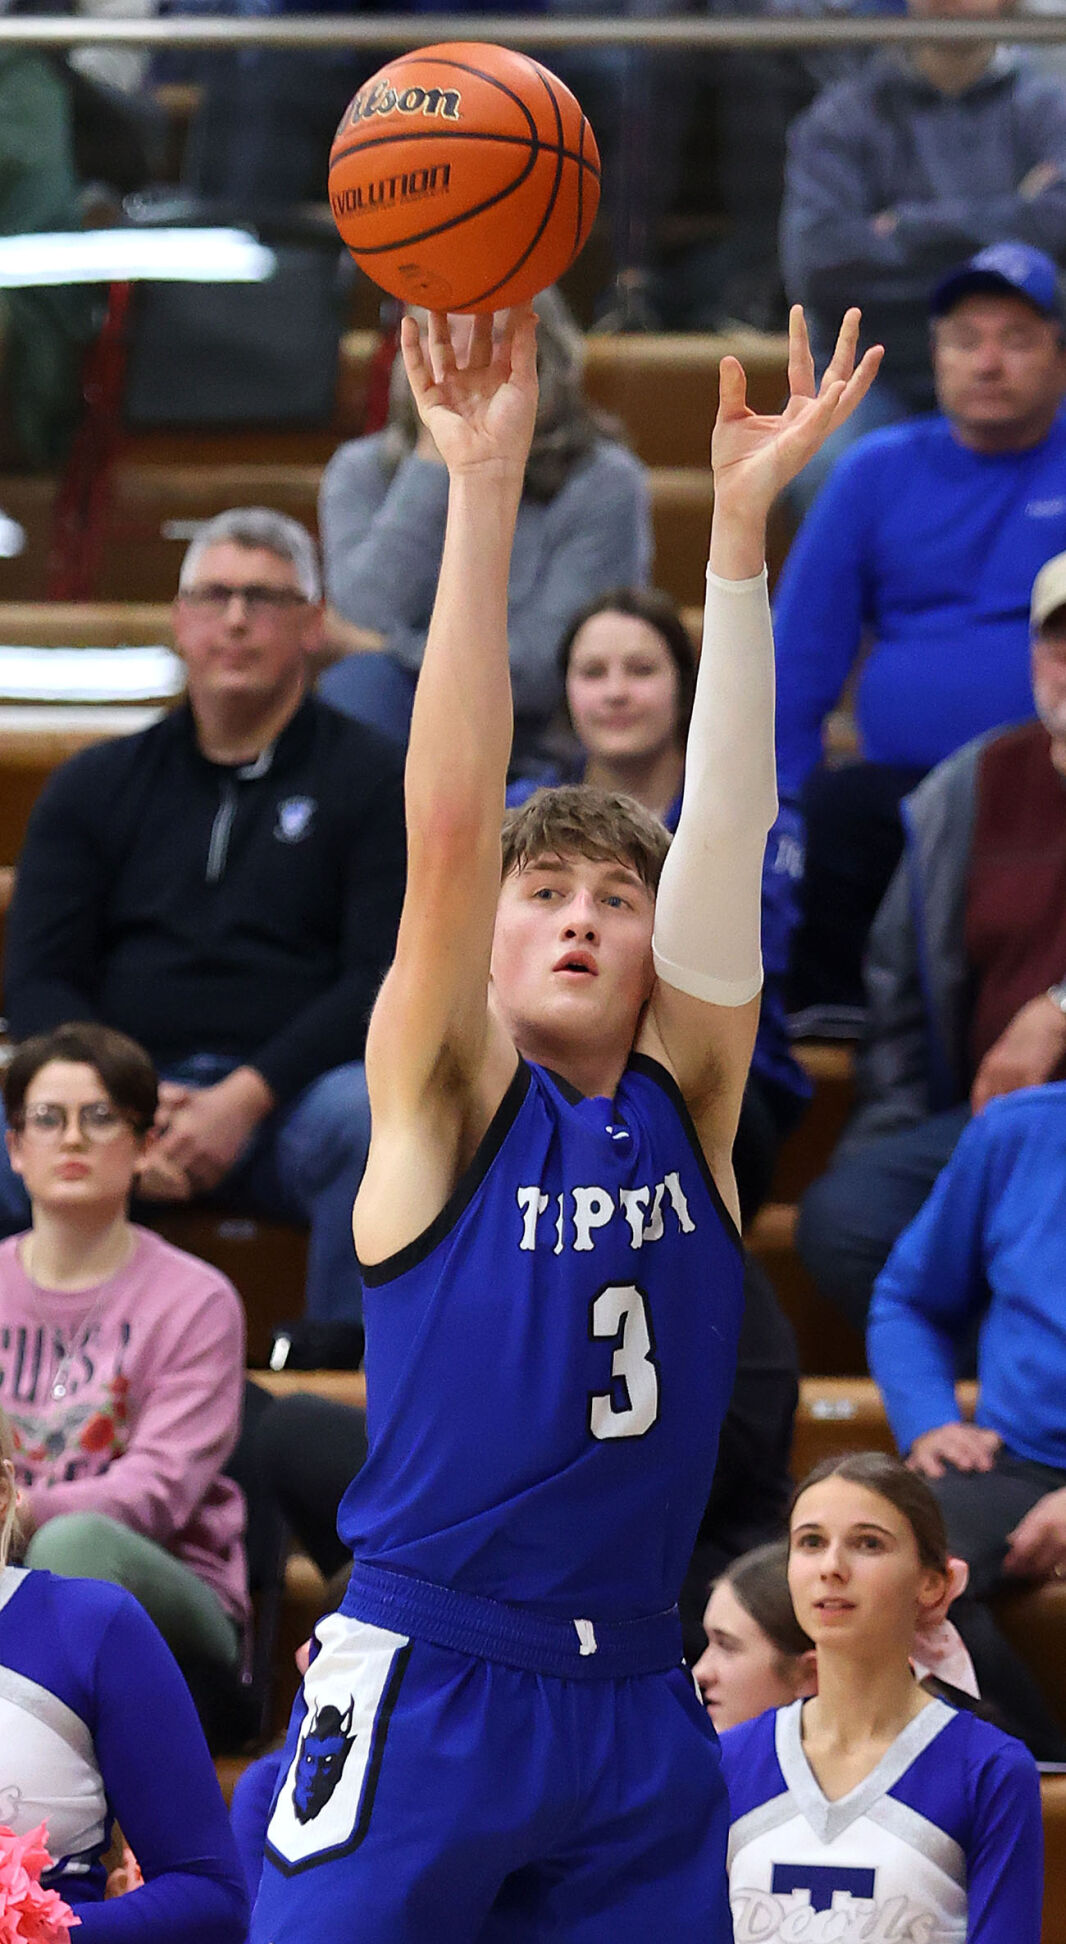 Tipton Blue Devils Dominate in Hoosier Conference Championship Win with Junior Guard Grady Carpenter’s Remarkable Performance